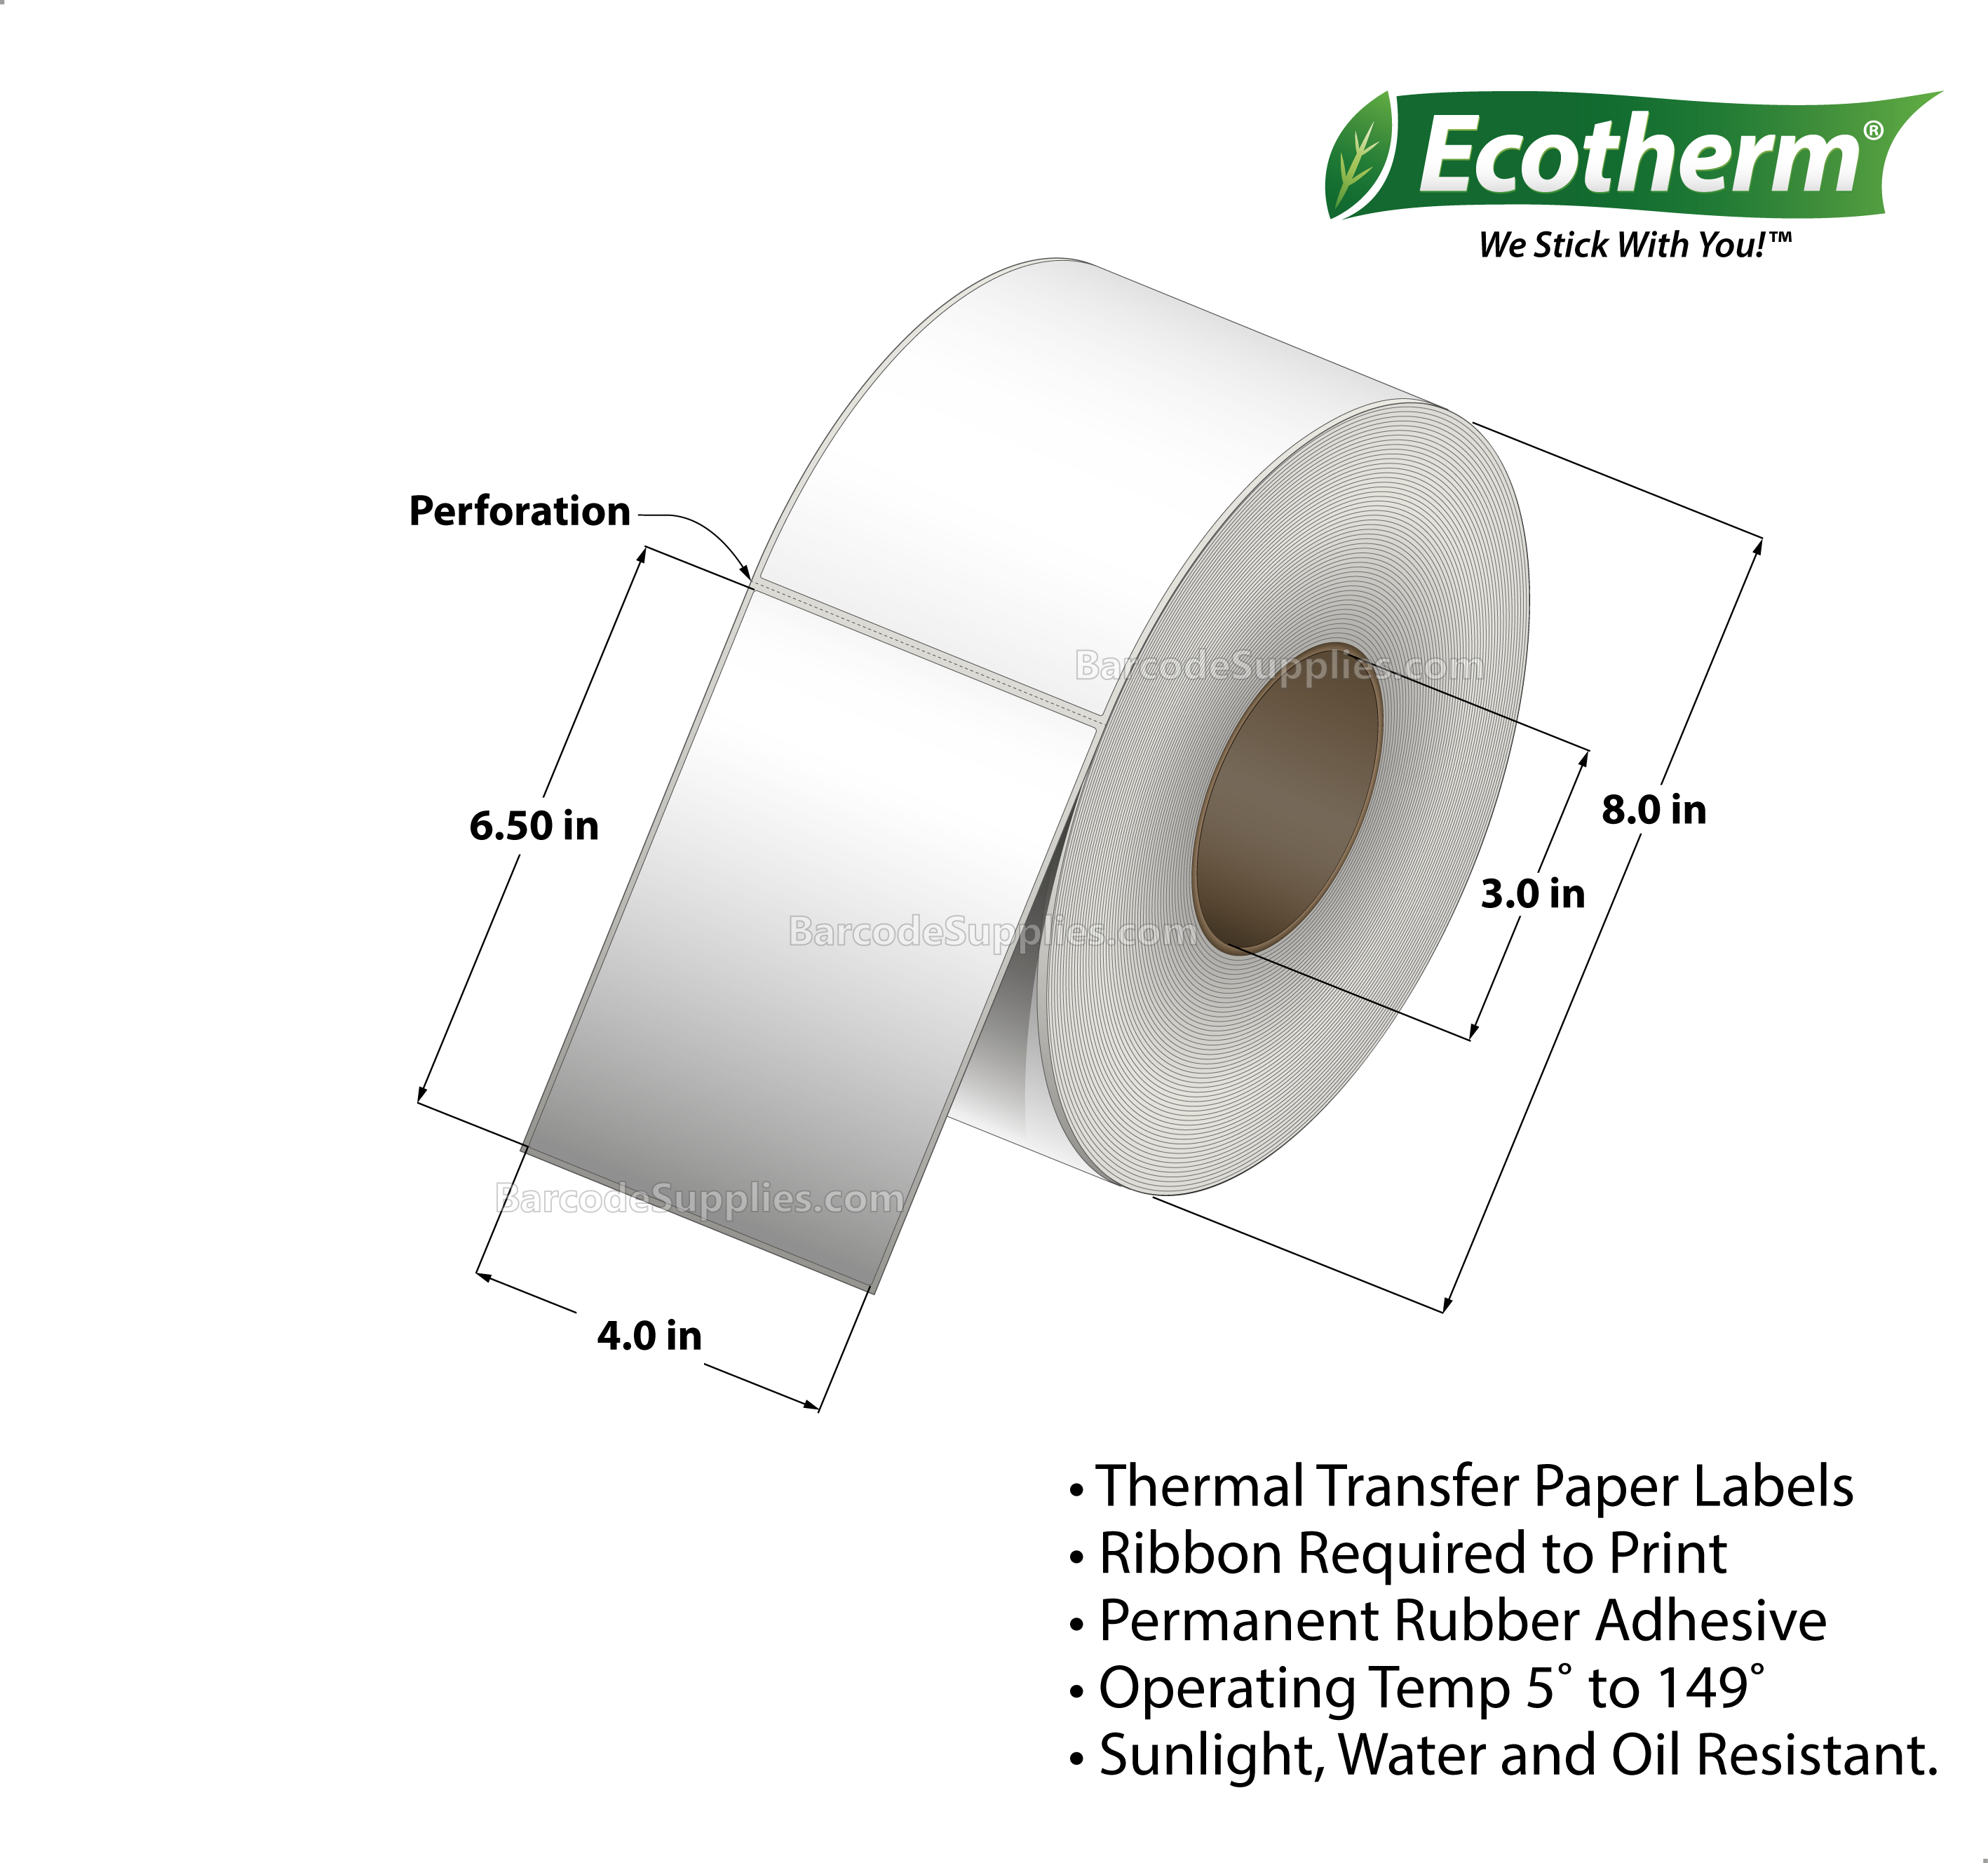 4 x 6.5 Thermal Transfer White Labels With Rubber Adhesive - Perforated - 925 Labels Per Roll - Carton Of 4 Rolls - 3700 Labels Total - MPN: ECOTHERM28146-4